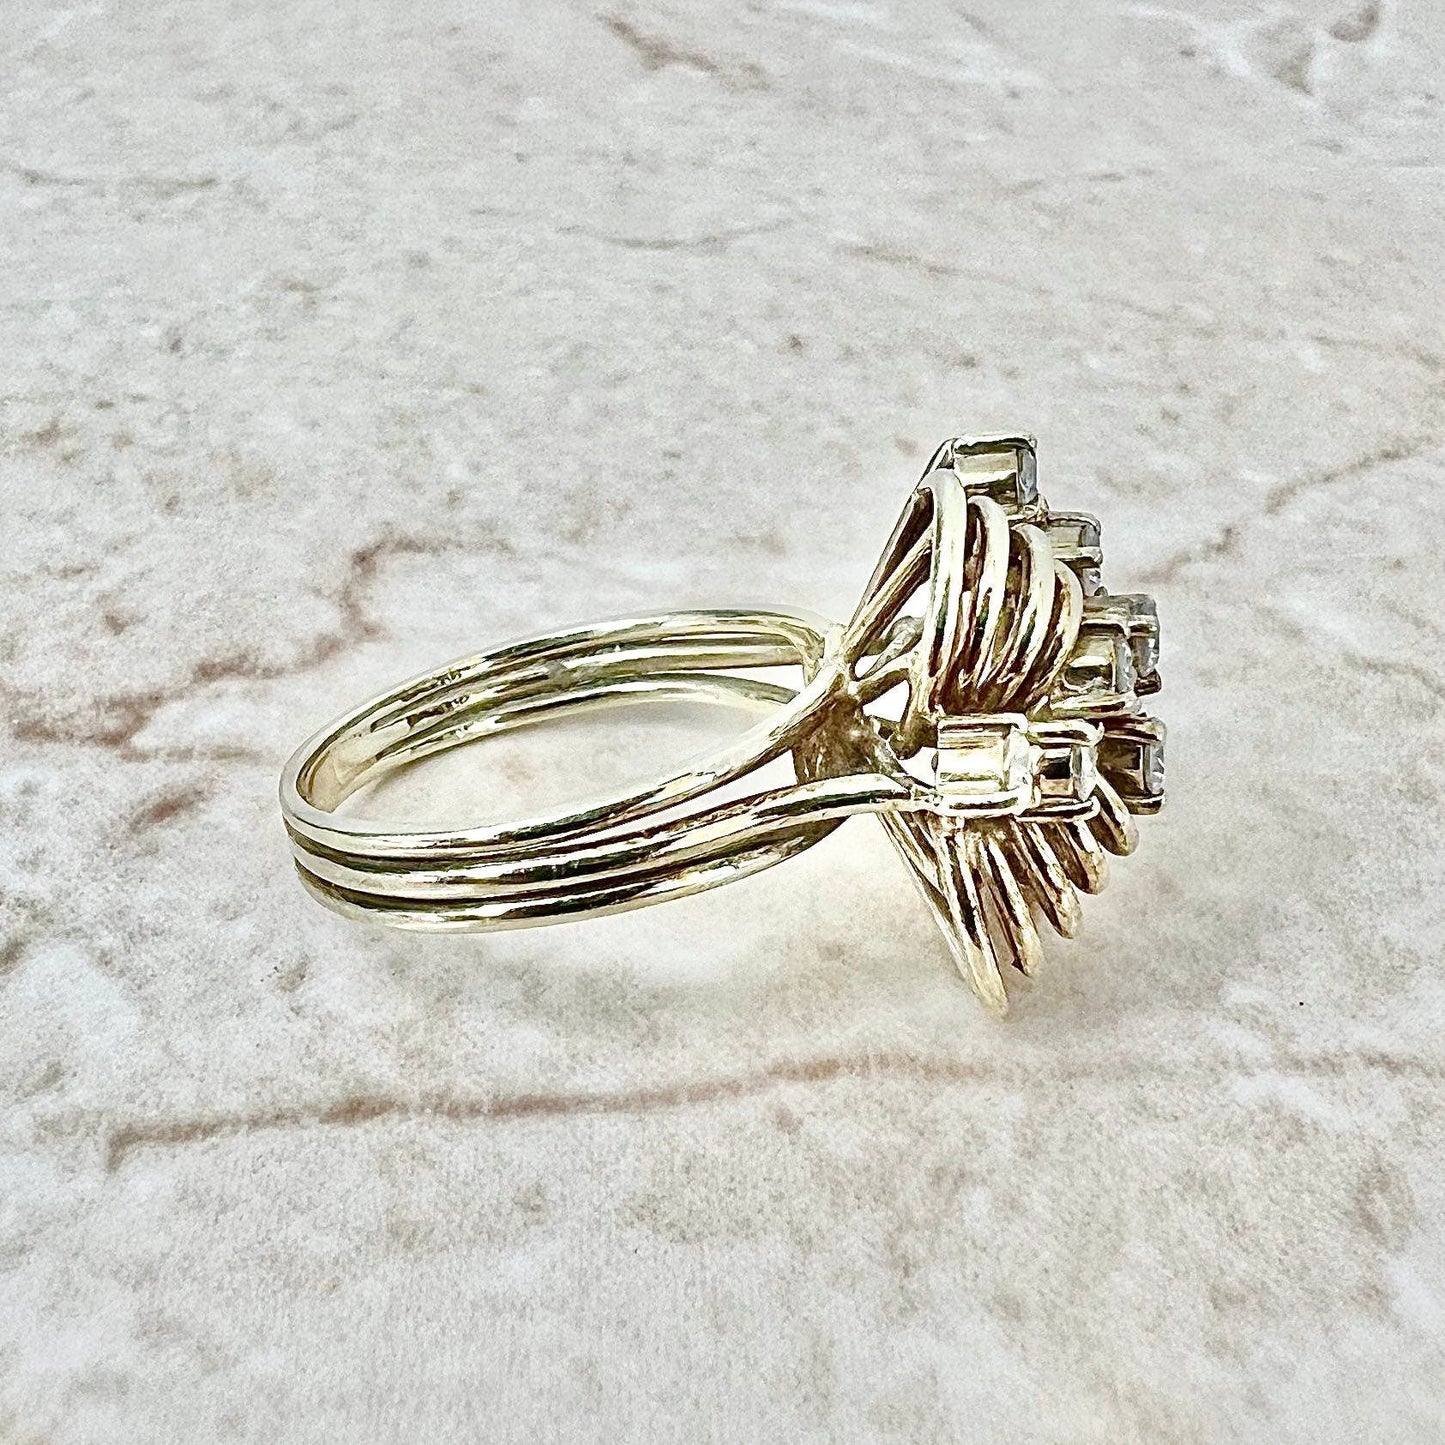 Fine Vintage 14K Diamond Ring - Yellow Gold Diamond Cocktail Ring - Statement Ring - Anniversary Ring - Birthday Gift - Best Gifts For Her